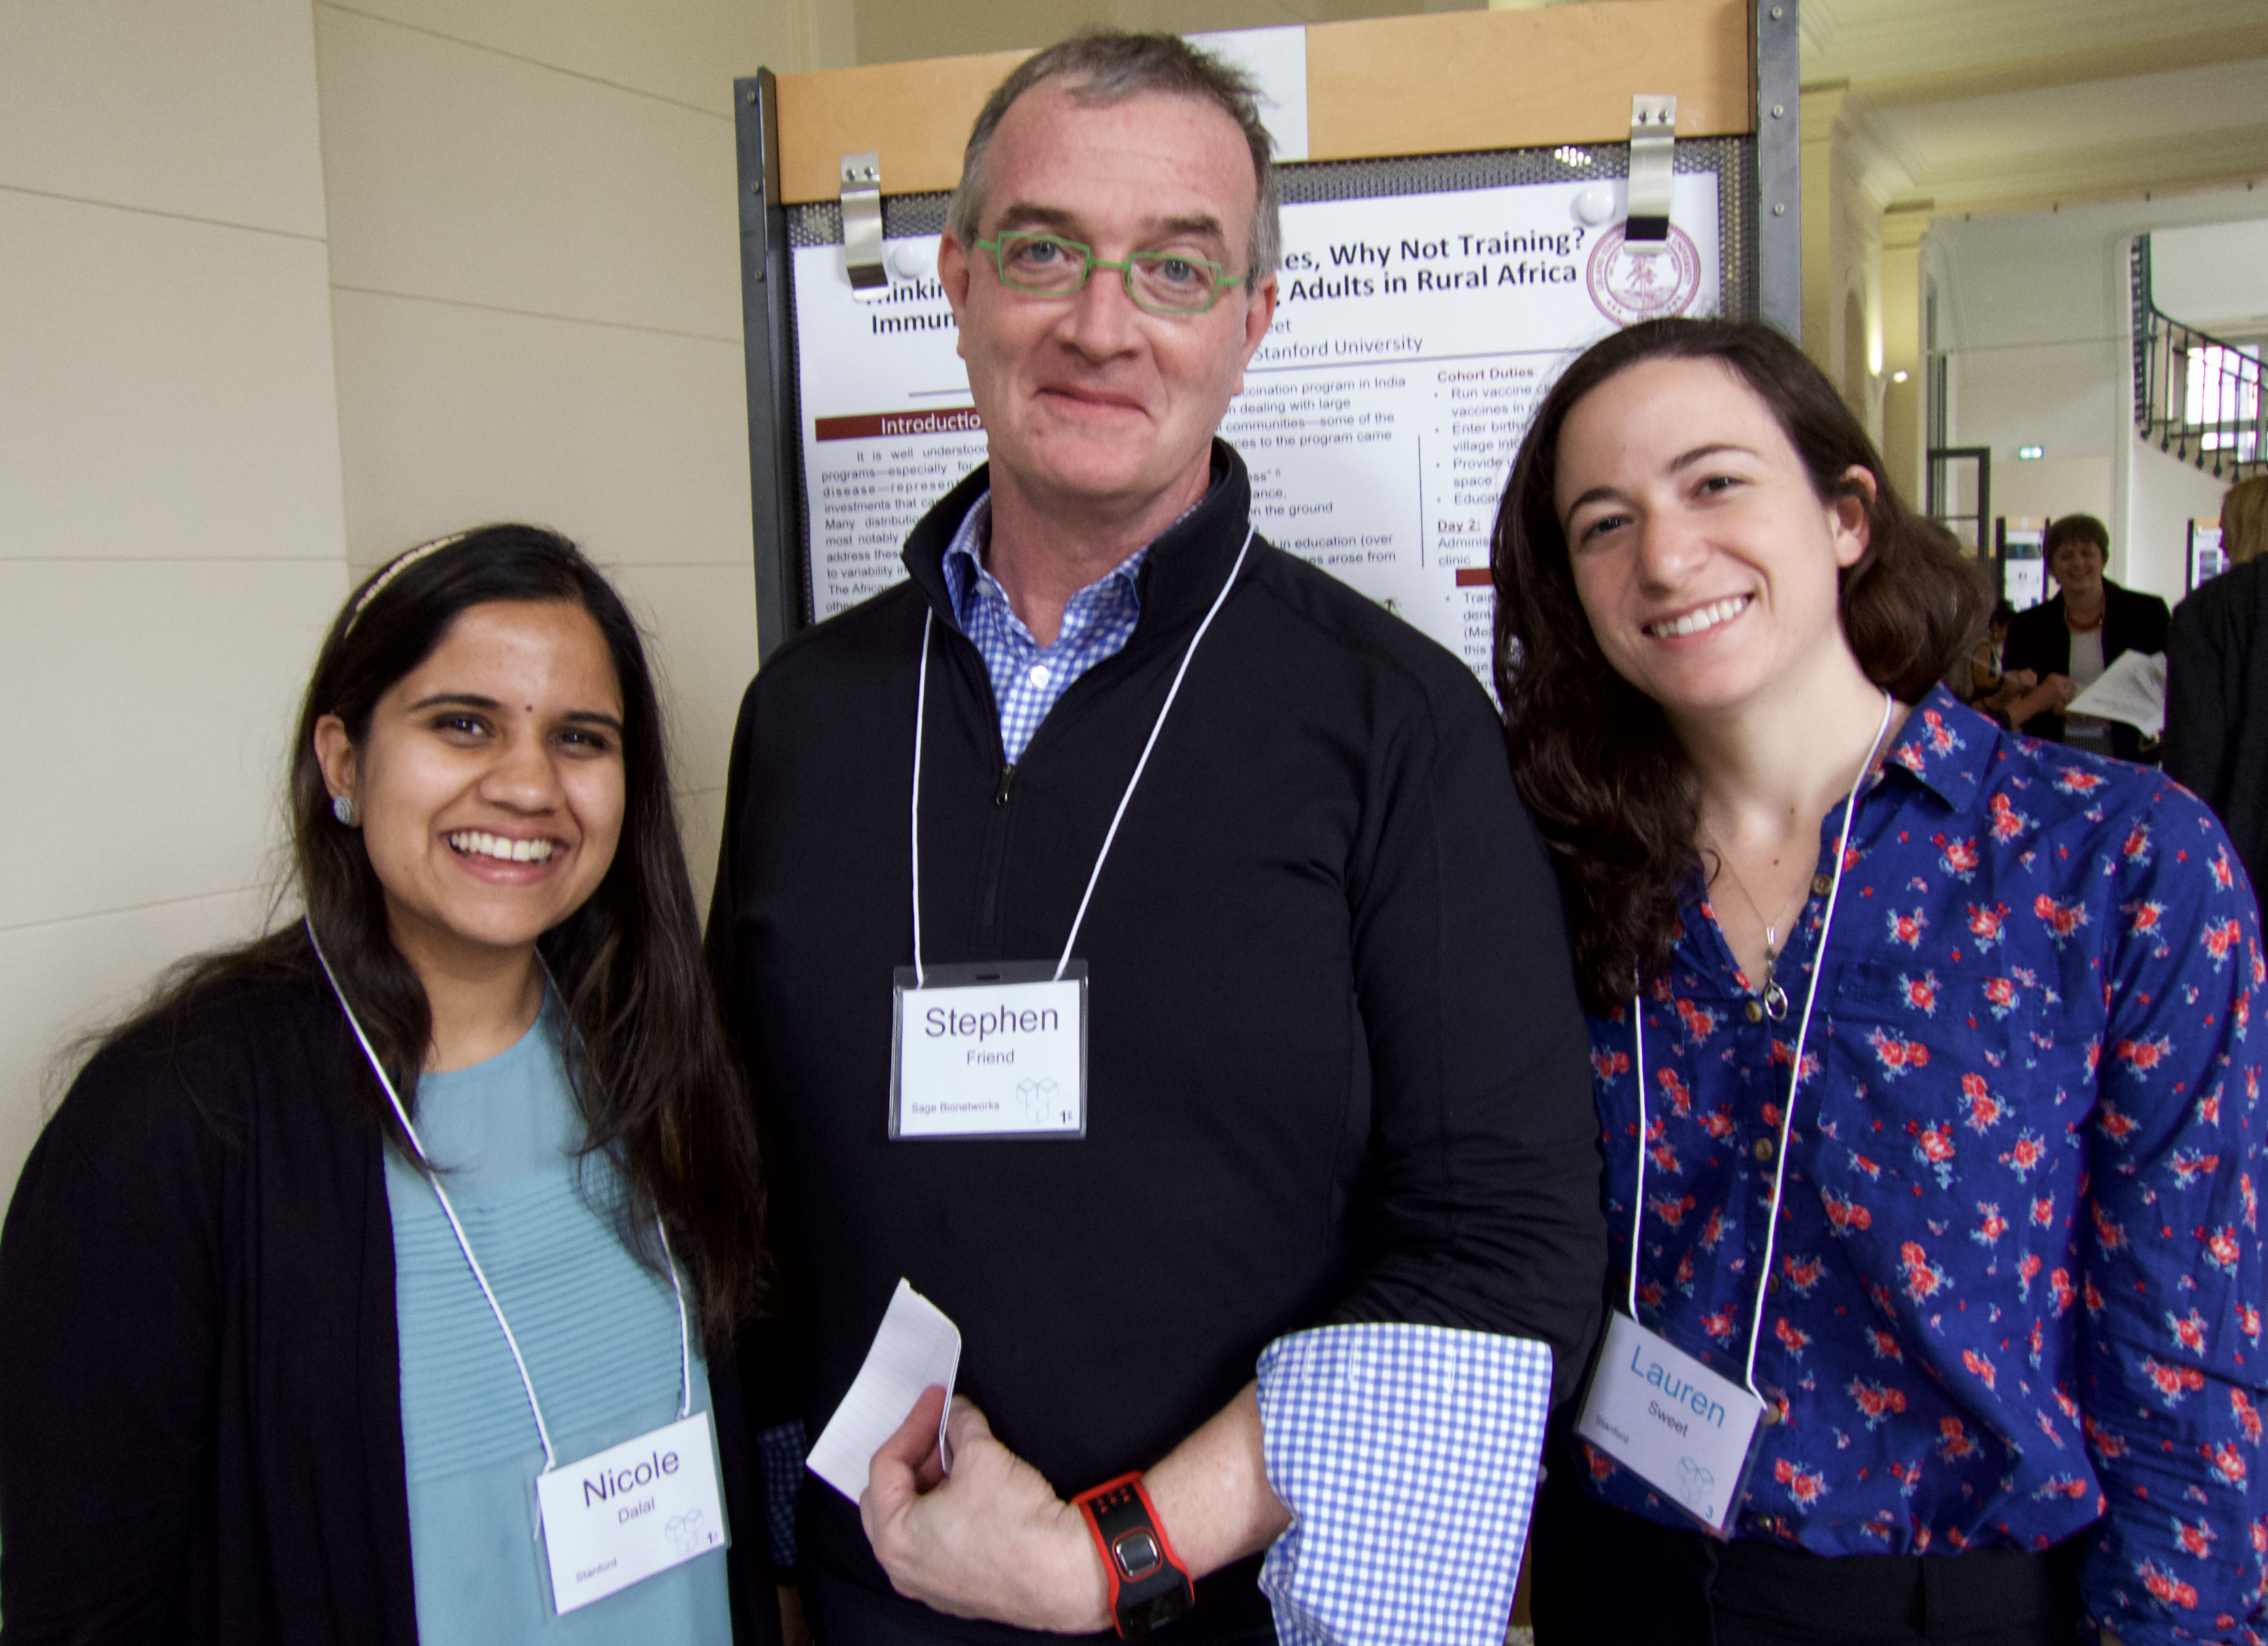 Sage Scholars Nicole Dalal and Lauren Sweet, from Stanford University, flank Stephen Friend at the Paris Sage Assembly, April 16, 2015.